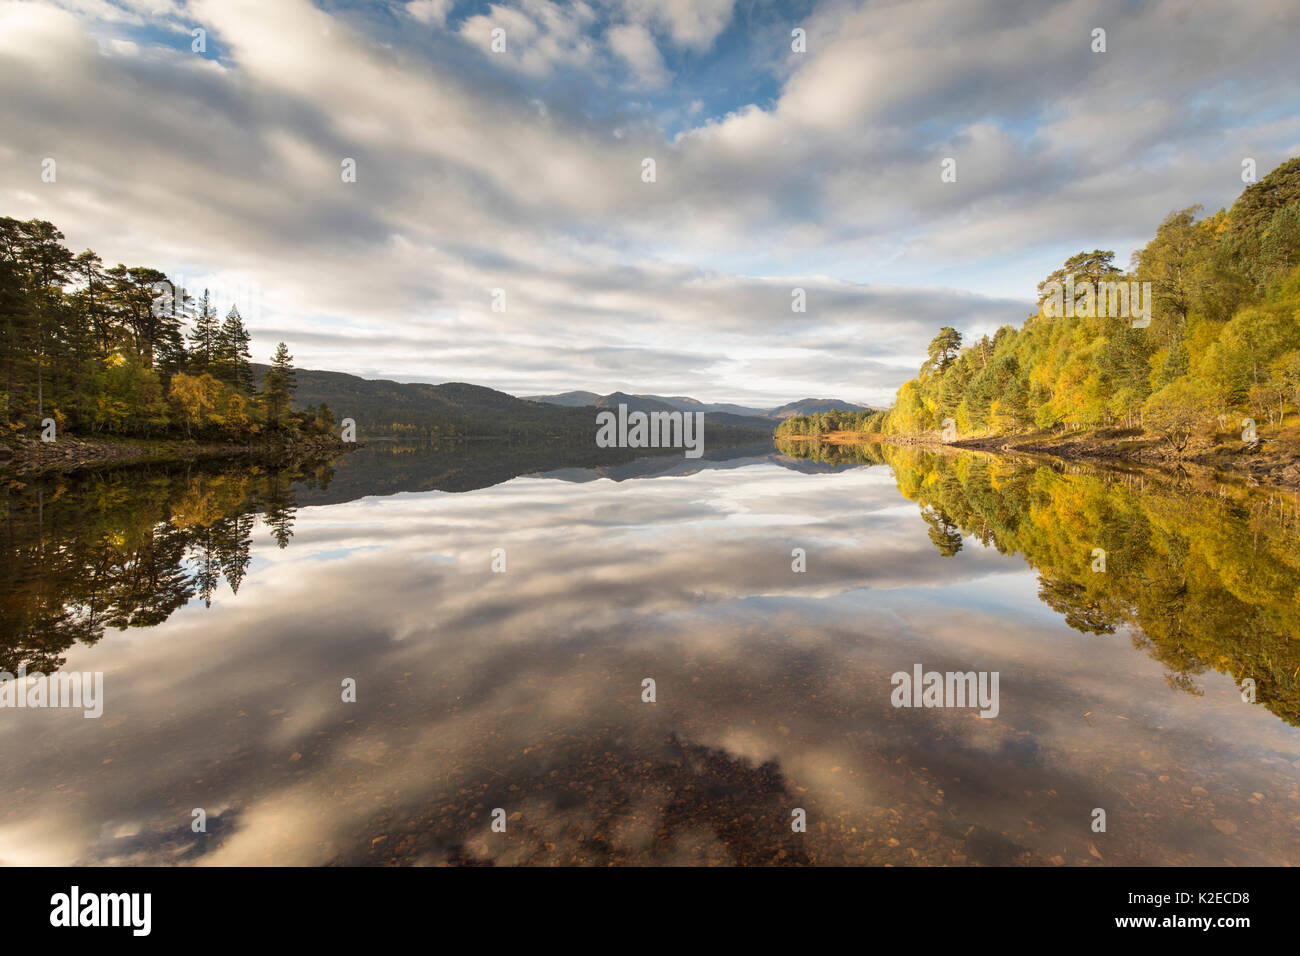 Tree reflections in Loch Beinn a Mheadhoin, Glen Affric National Nature Reserve, Scotland, UK, October 2015. Stock Photo